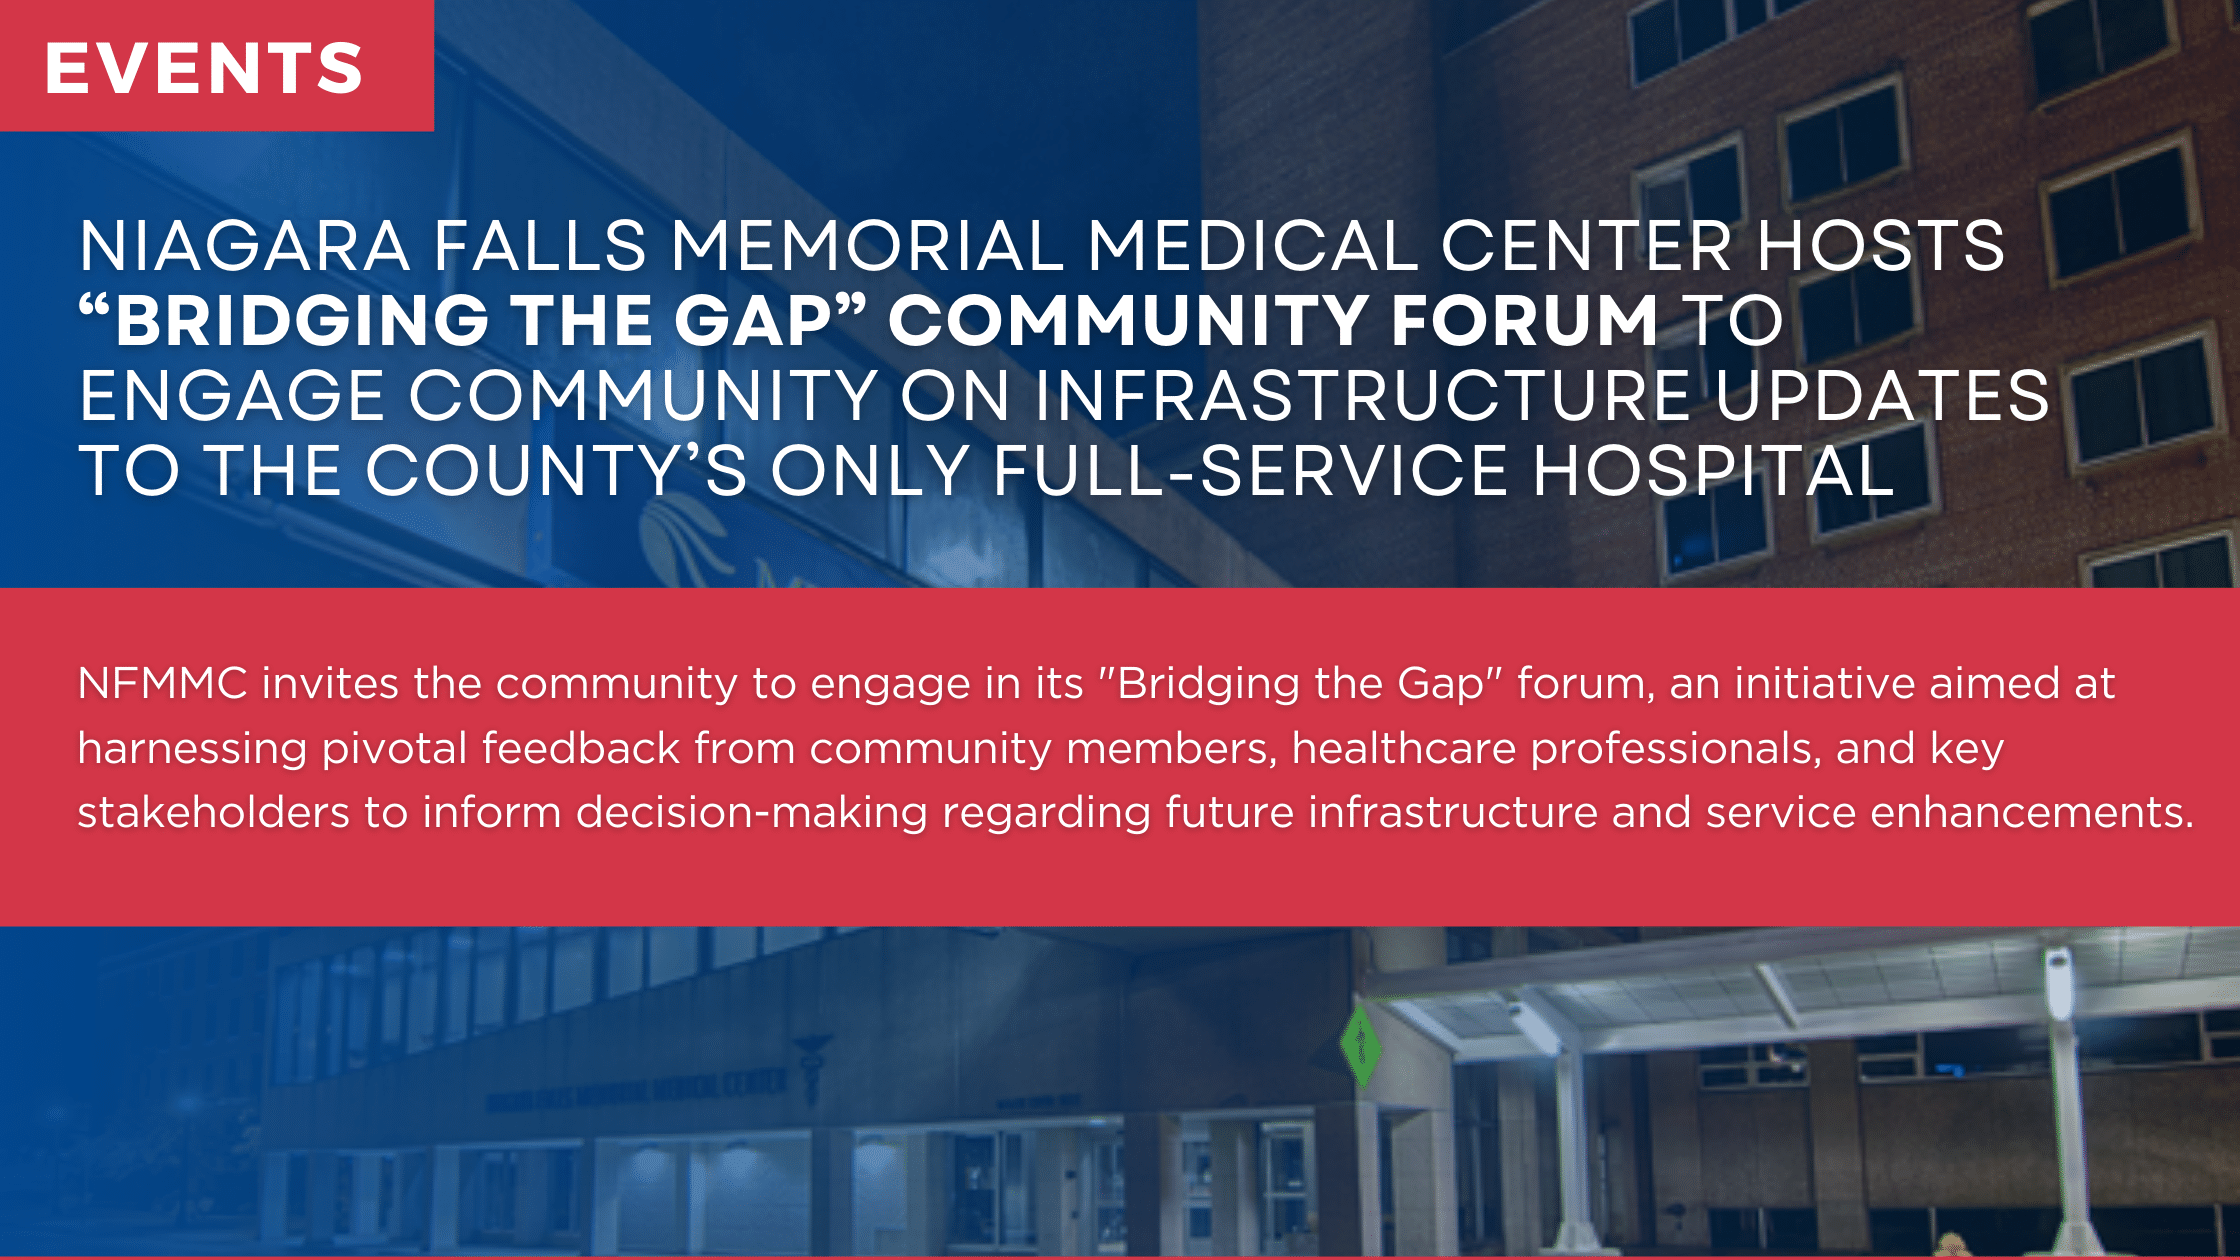 Niagara Falls Memorial Medical Center Hosts “Bridging the Gap” Community Forum to Engage Community on Infrastructure Updates to the County’s Only Full-Service Hospital